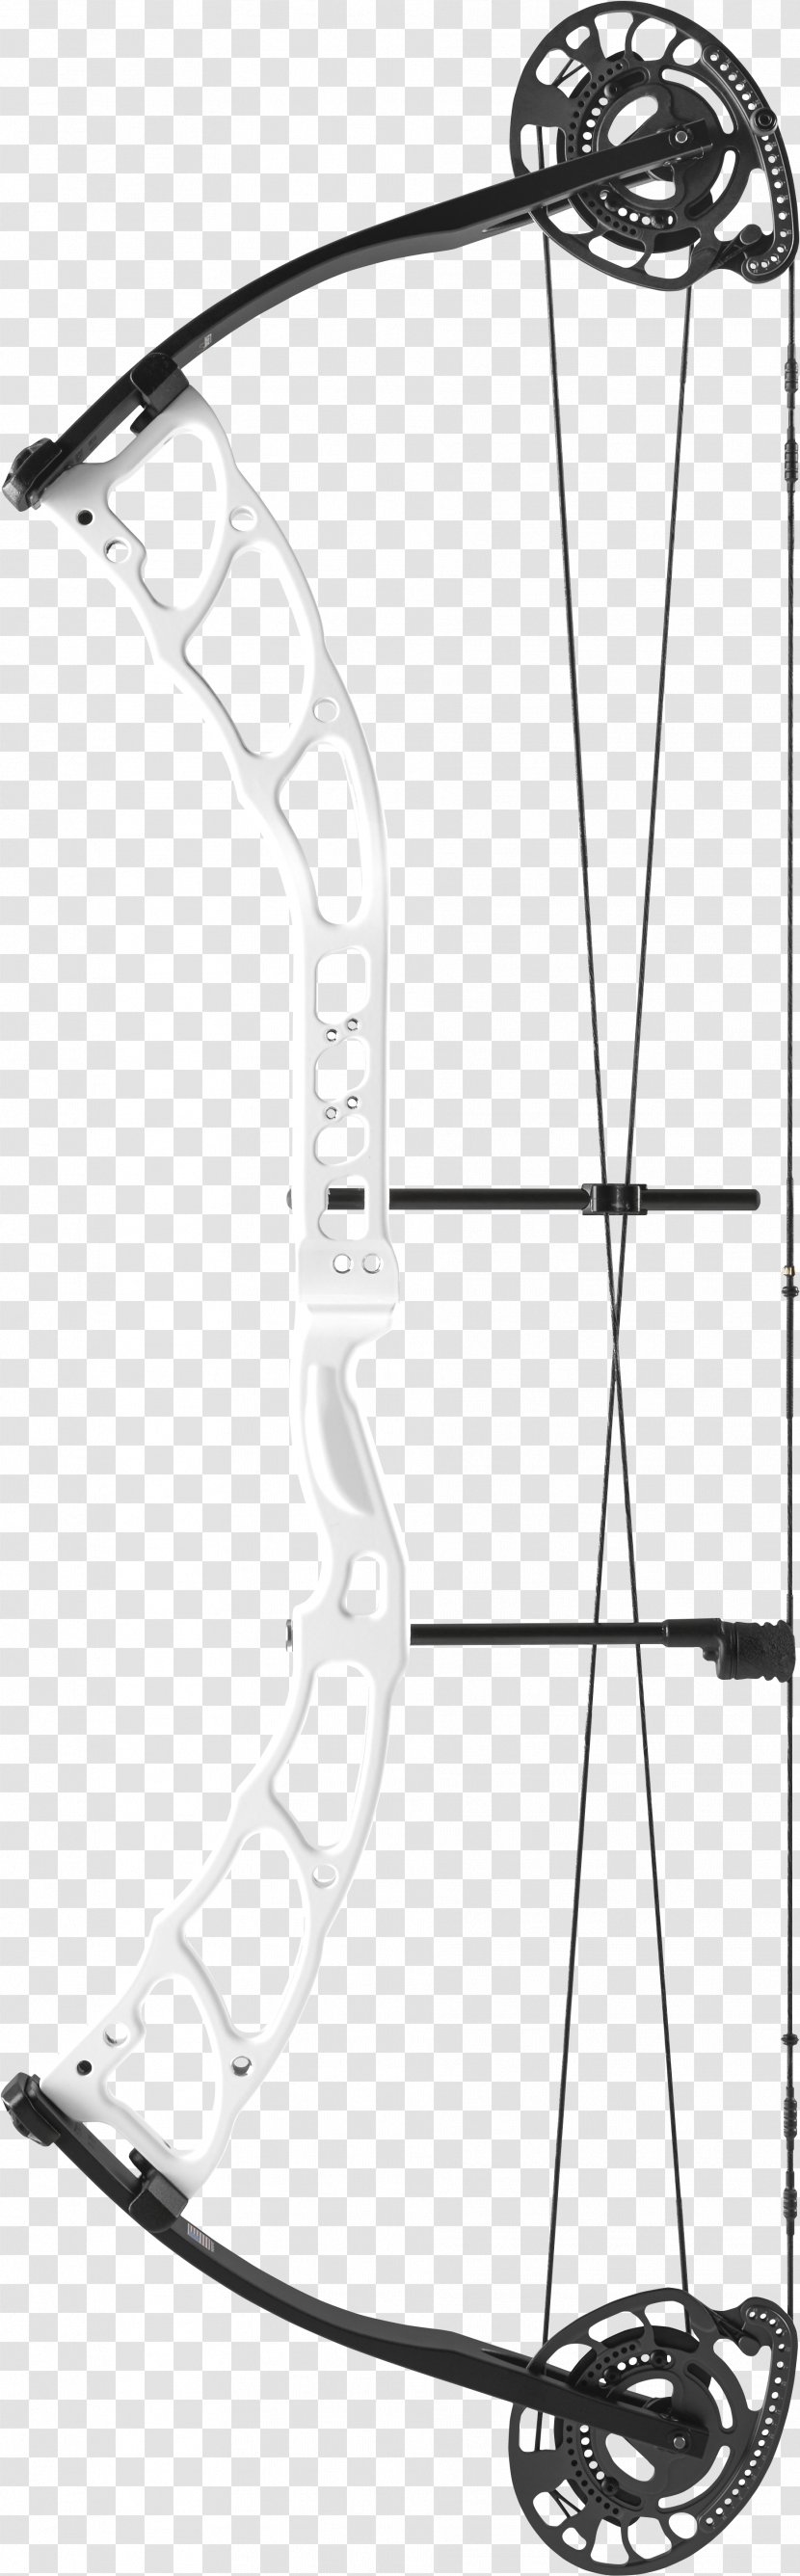 Archery Bow And Arrow Compound Bows Hunting Medal - Monochrome Transparent PNG